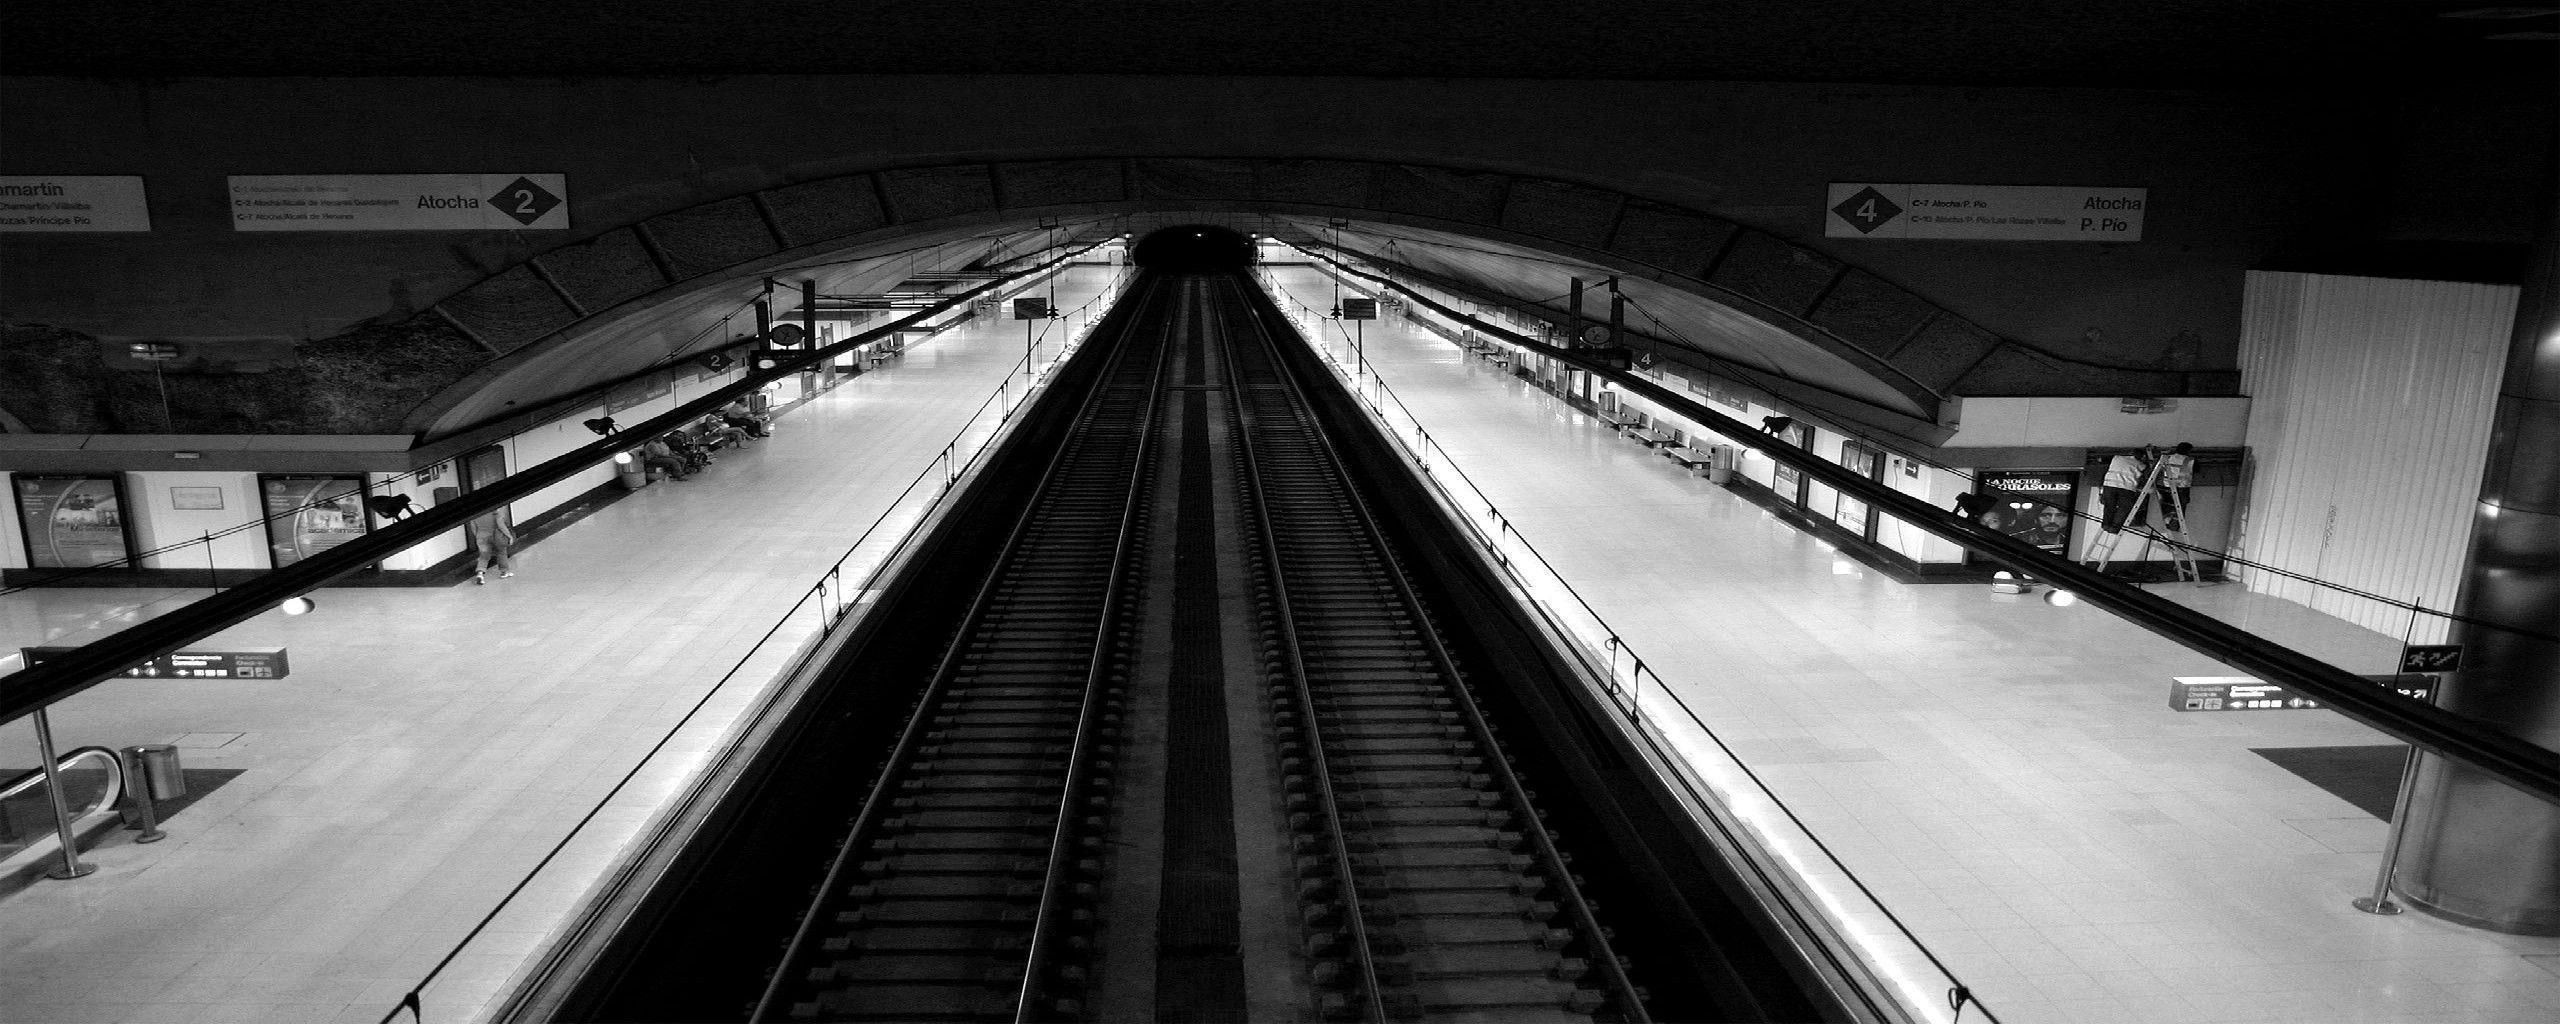 Subway station in black and white 2560x1024 Desktop Dual Screen